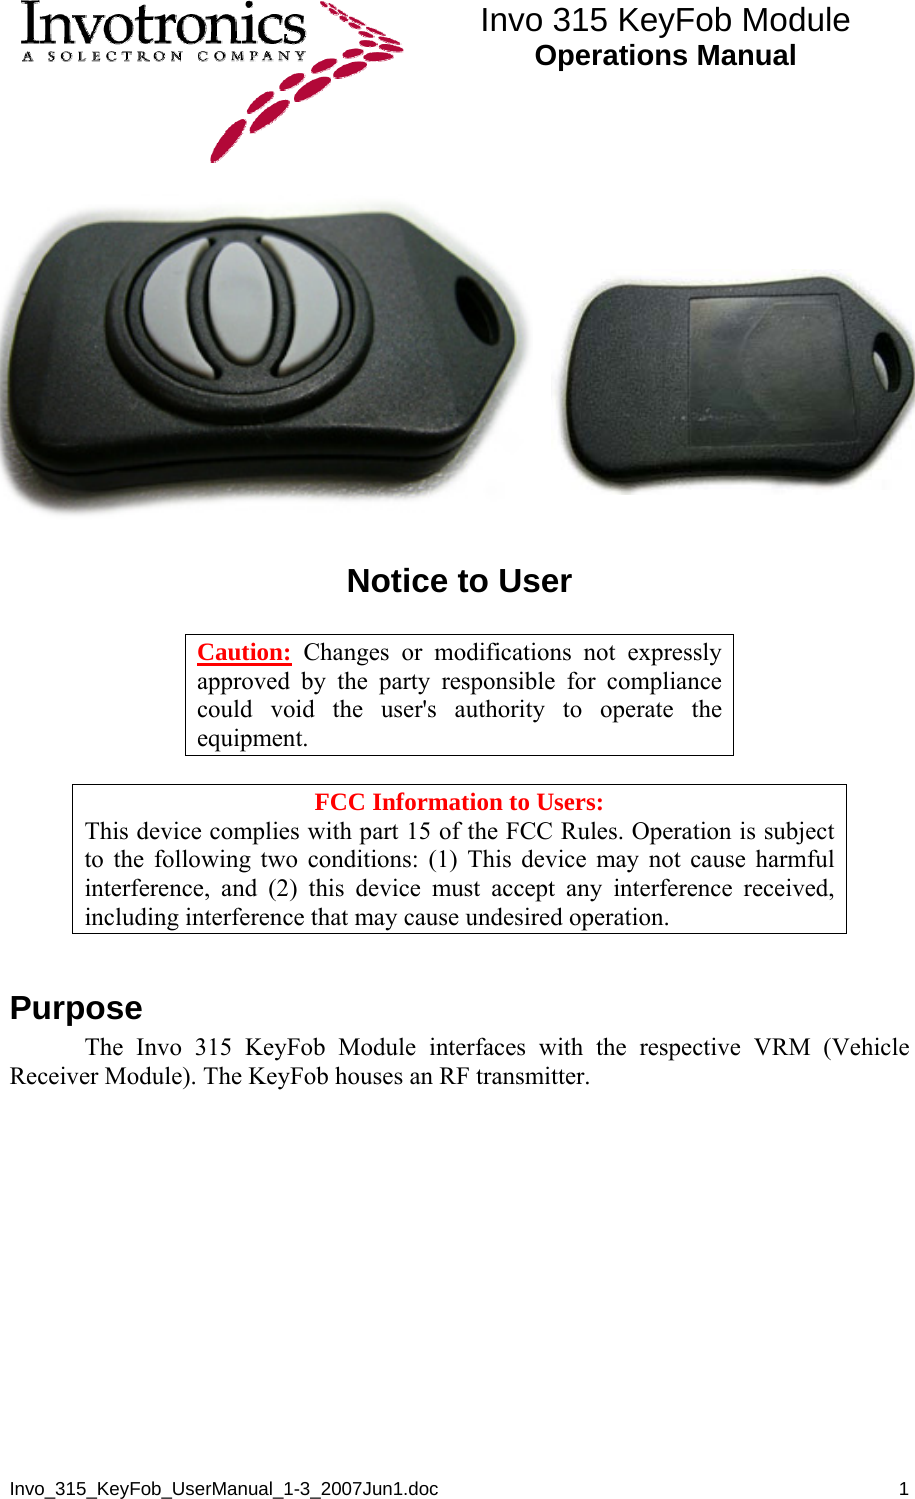  Invo 315 KeyFob Module Operations Manual  Invo_315_KeyFob_UserManual_1-3_2007Jun1.doc       1   Notice to User    Caution: Changes or modifications not expressly approved by the party responsible for compliance could void the user&apos;s authority to operate the equipment.  FCC Information to Users: This device complies with part 15 of the FCC Rules. Operation is subject to the following two conditions: (1) This device may not cause harmful interference, and (2) this device must accept any interference received, including interference that may cause undesired operation.  Purpose  The Invo 315 KeyFob Module interfaces with the respective VRM (Vehicle Receiver Module). The KeyFob houses an RF transmitter.   